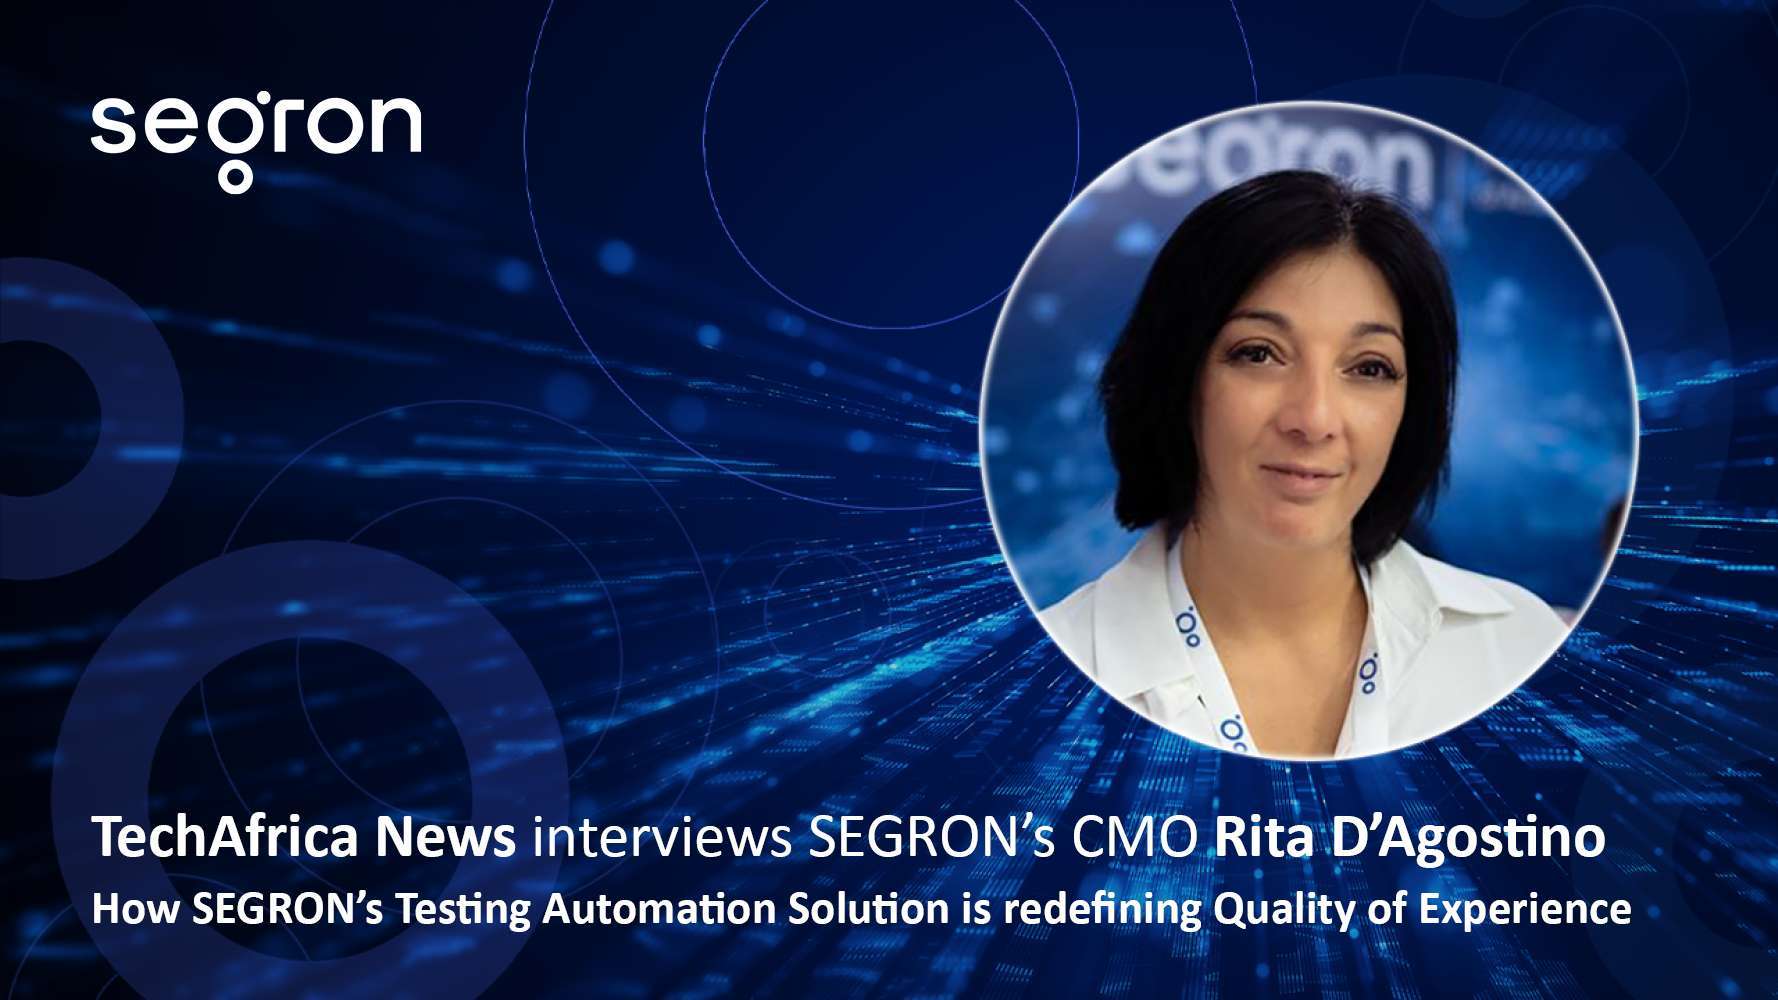 SEGRON & TechAfrica News: How SEGRON’s Testing Automation Solution is Redefining Quality of Experience